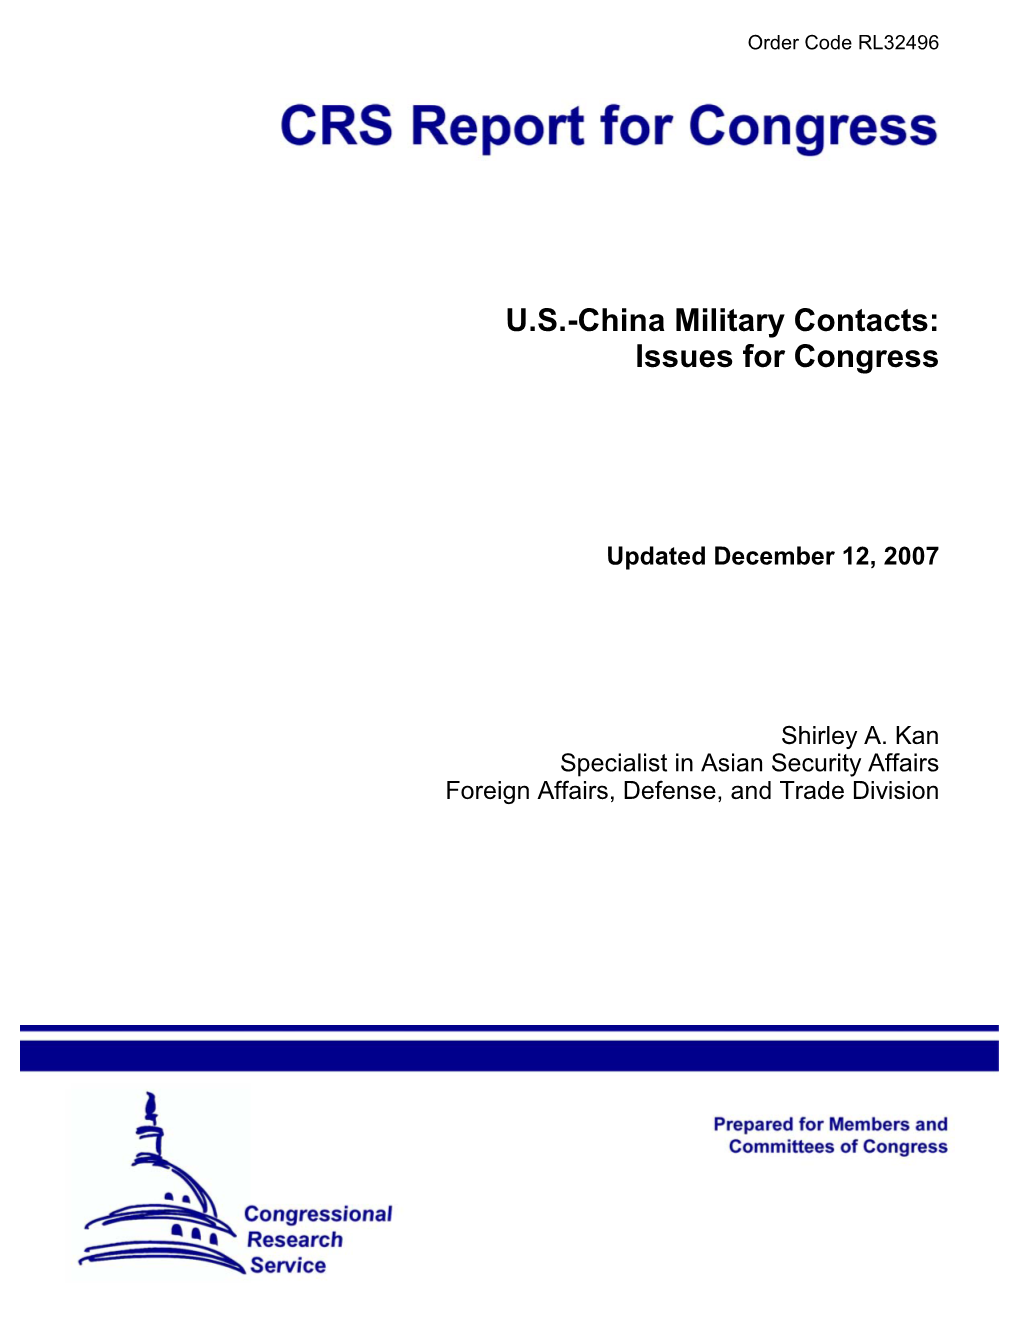 US-China Military Contacts: Issues for Congress